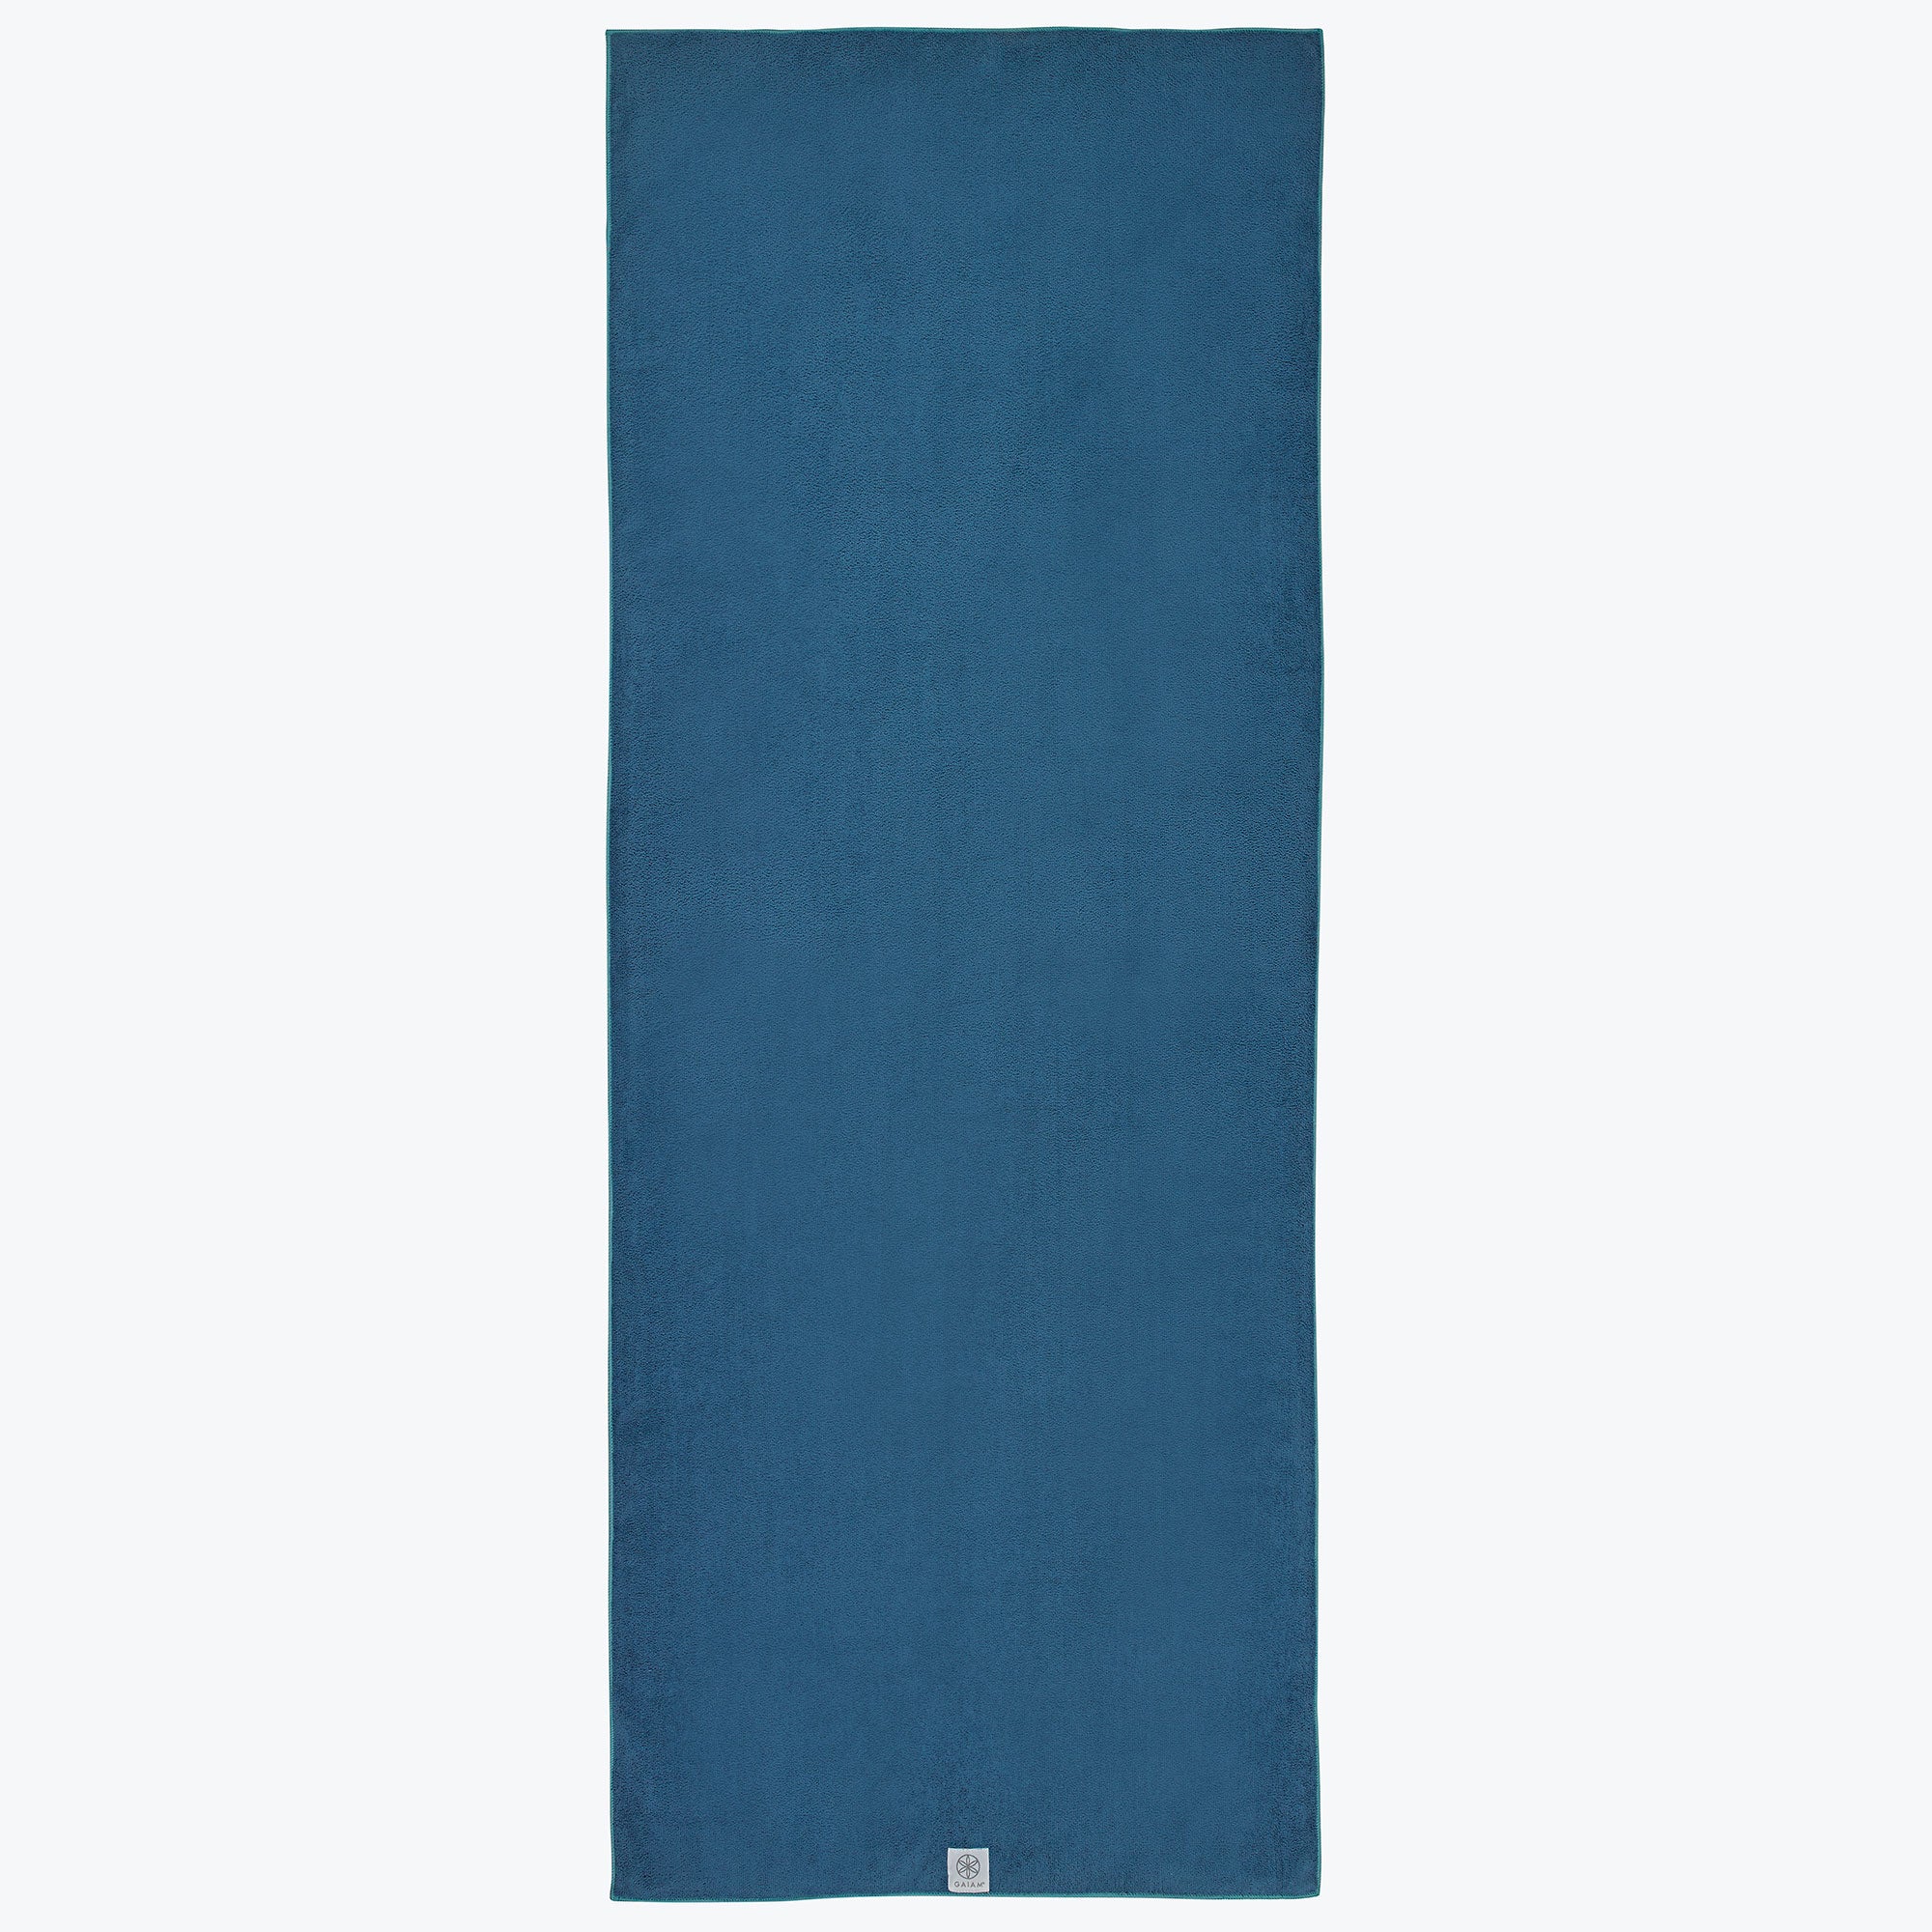 Divided Sky Yoga Towel. Grip Texture. Compact Travel Pouch. Quick